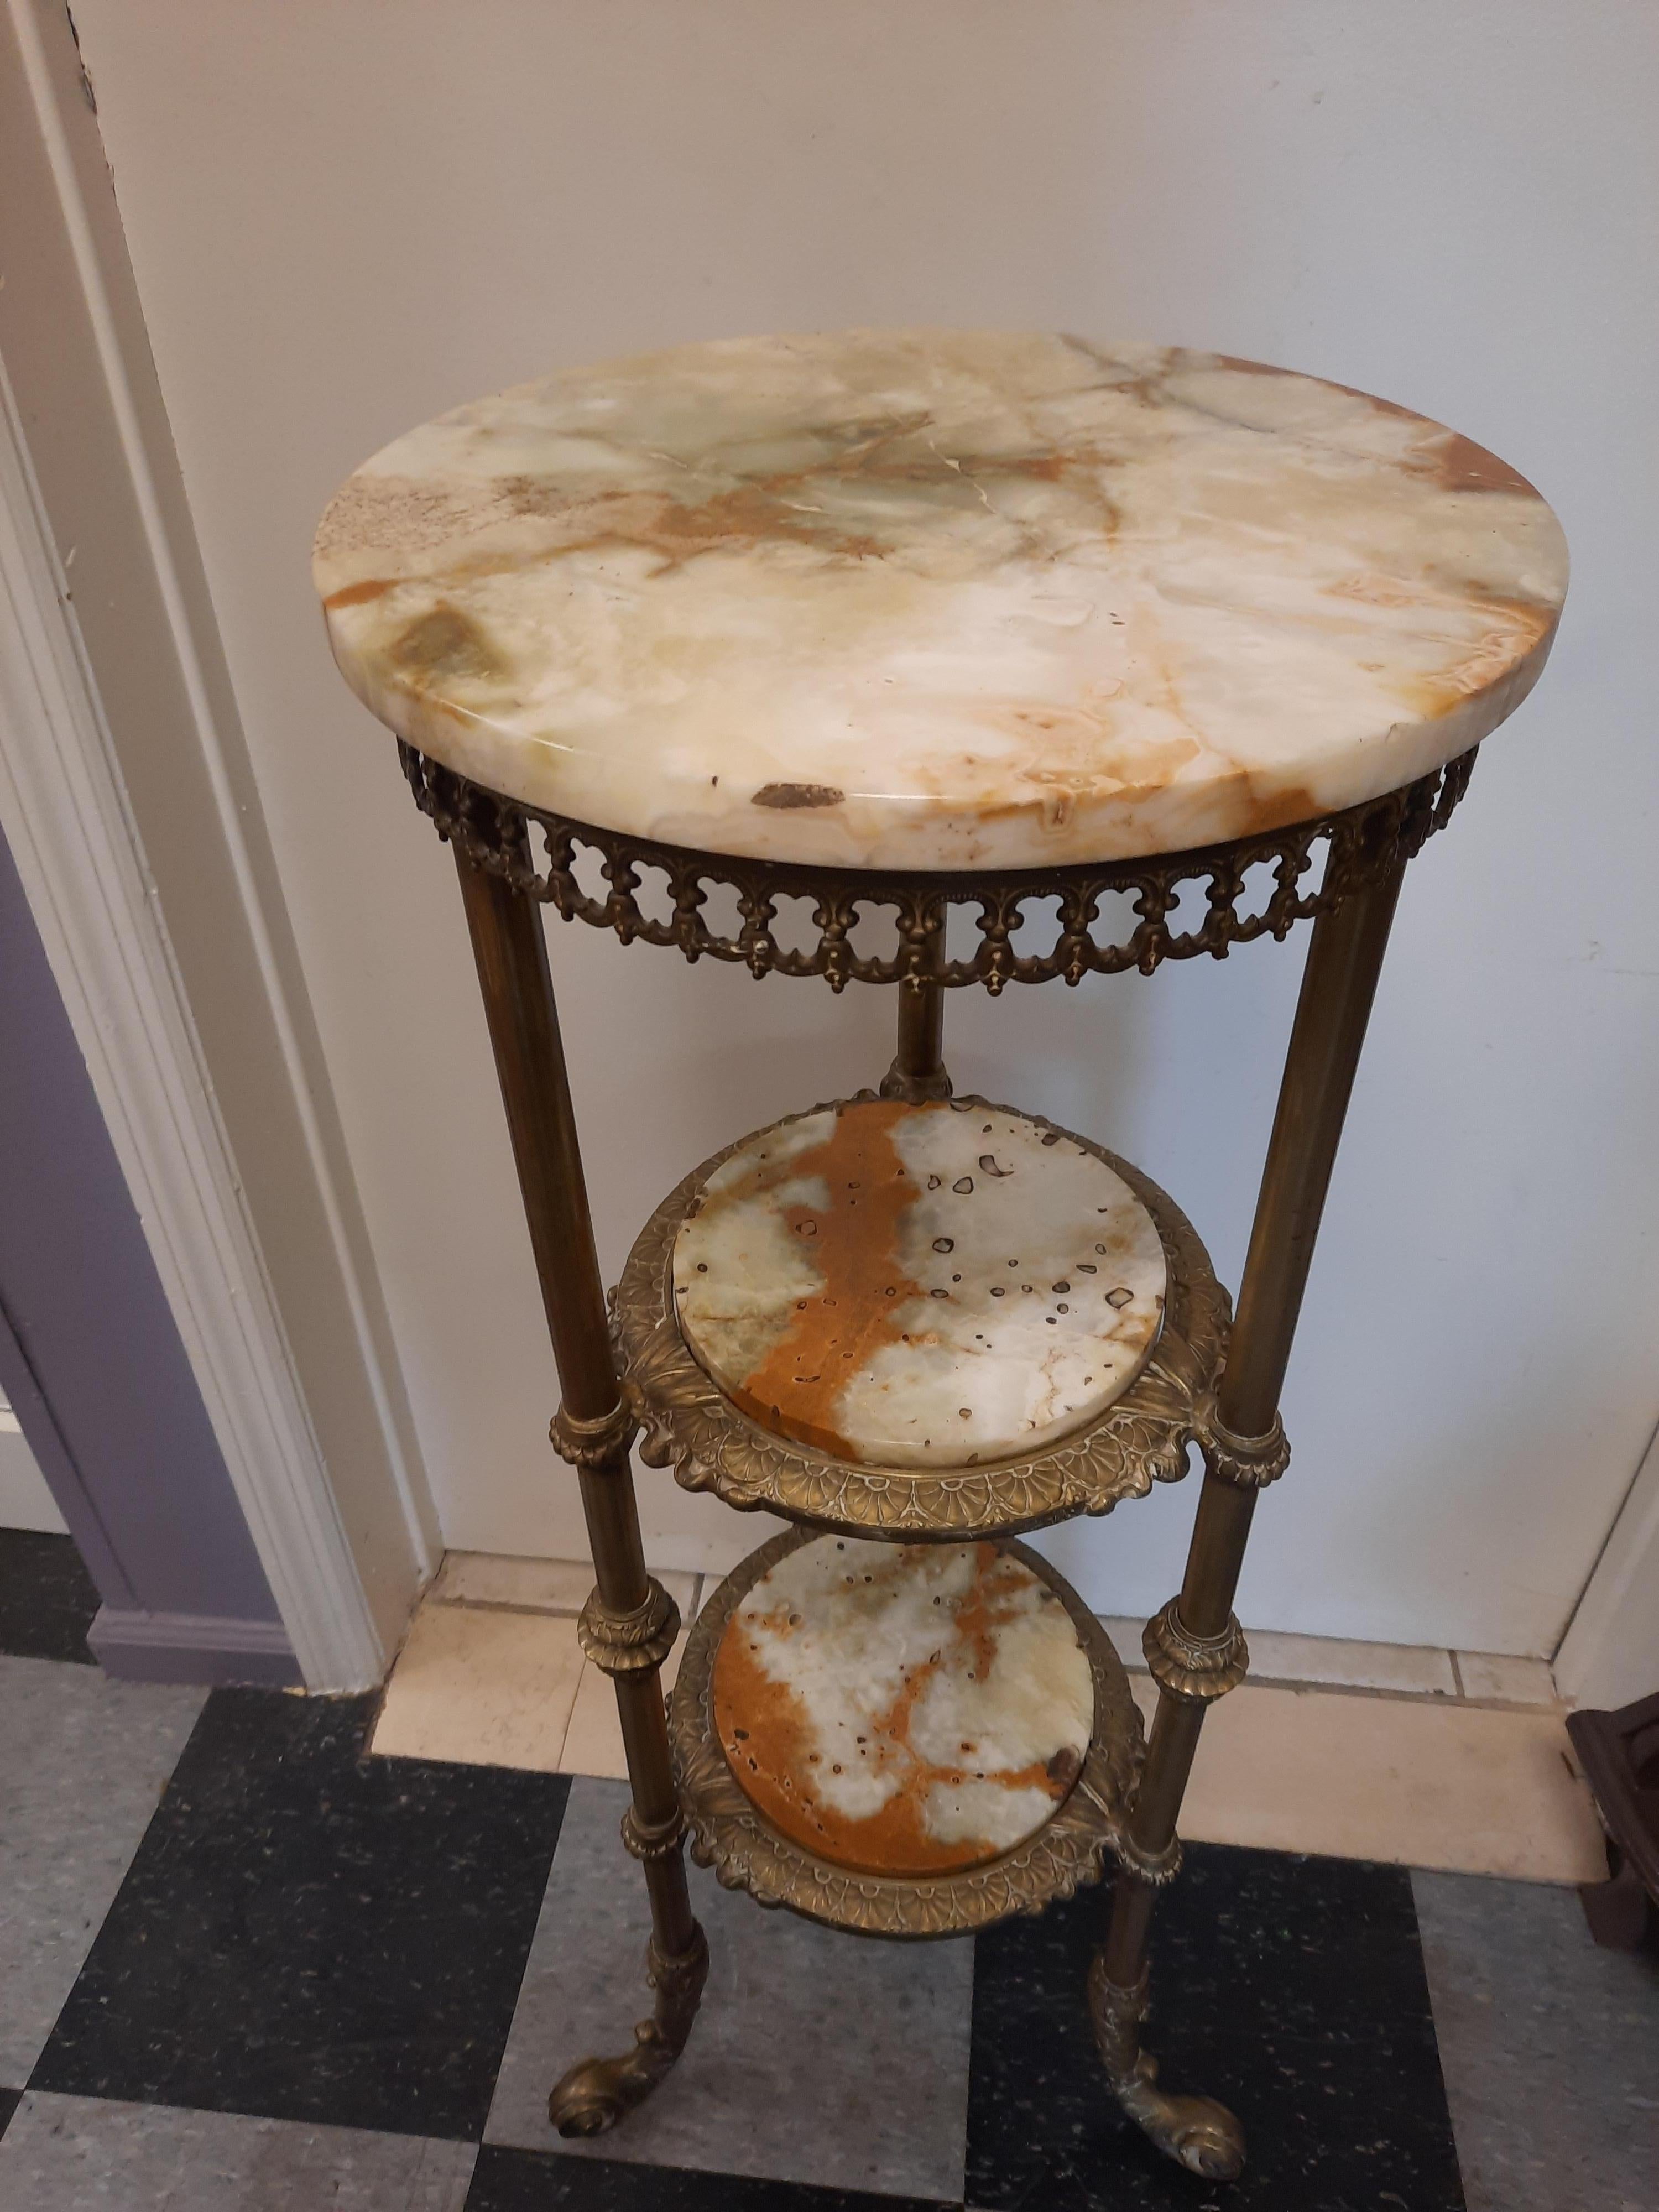 Antique 3 tier marble and solid brass pedestal/stand. Beautiful details and patina on the brass, please see photos for details. The three display areas are topped with a unique marble that sits in the brass frame for security. The top marble sits on